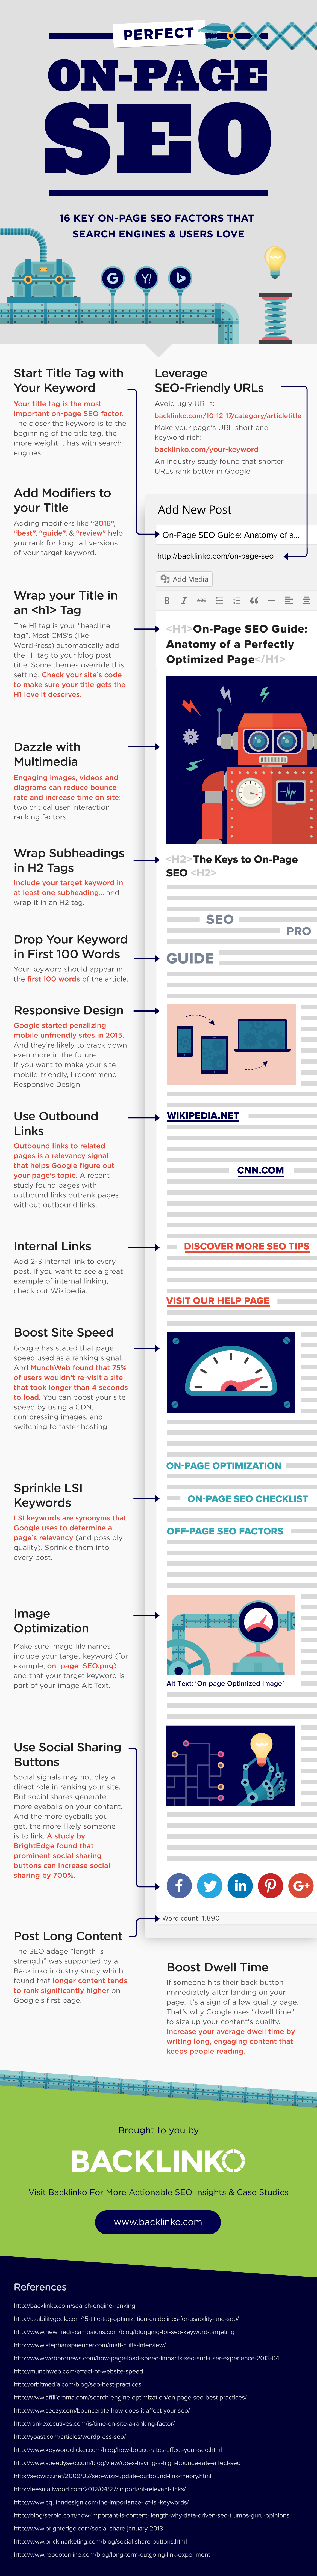 SEO On Page Infographic